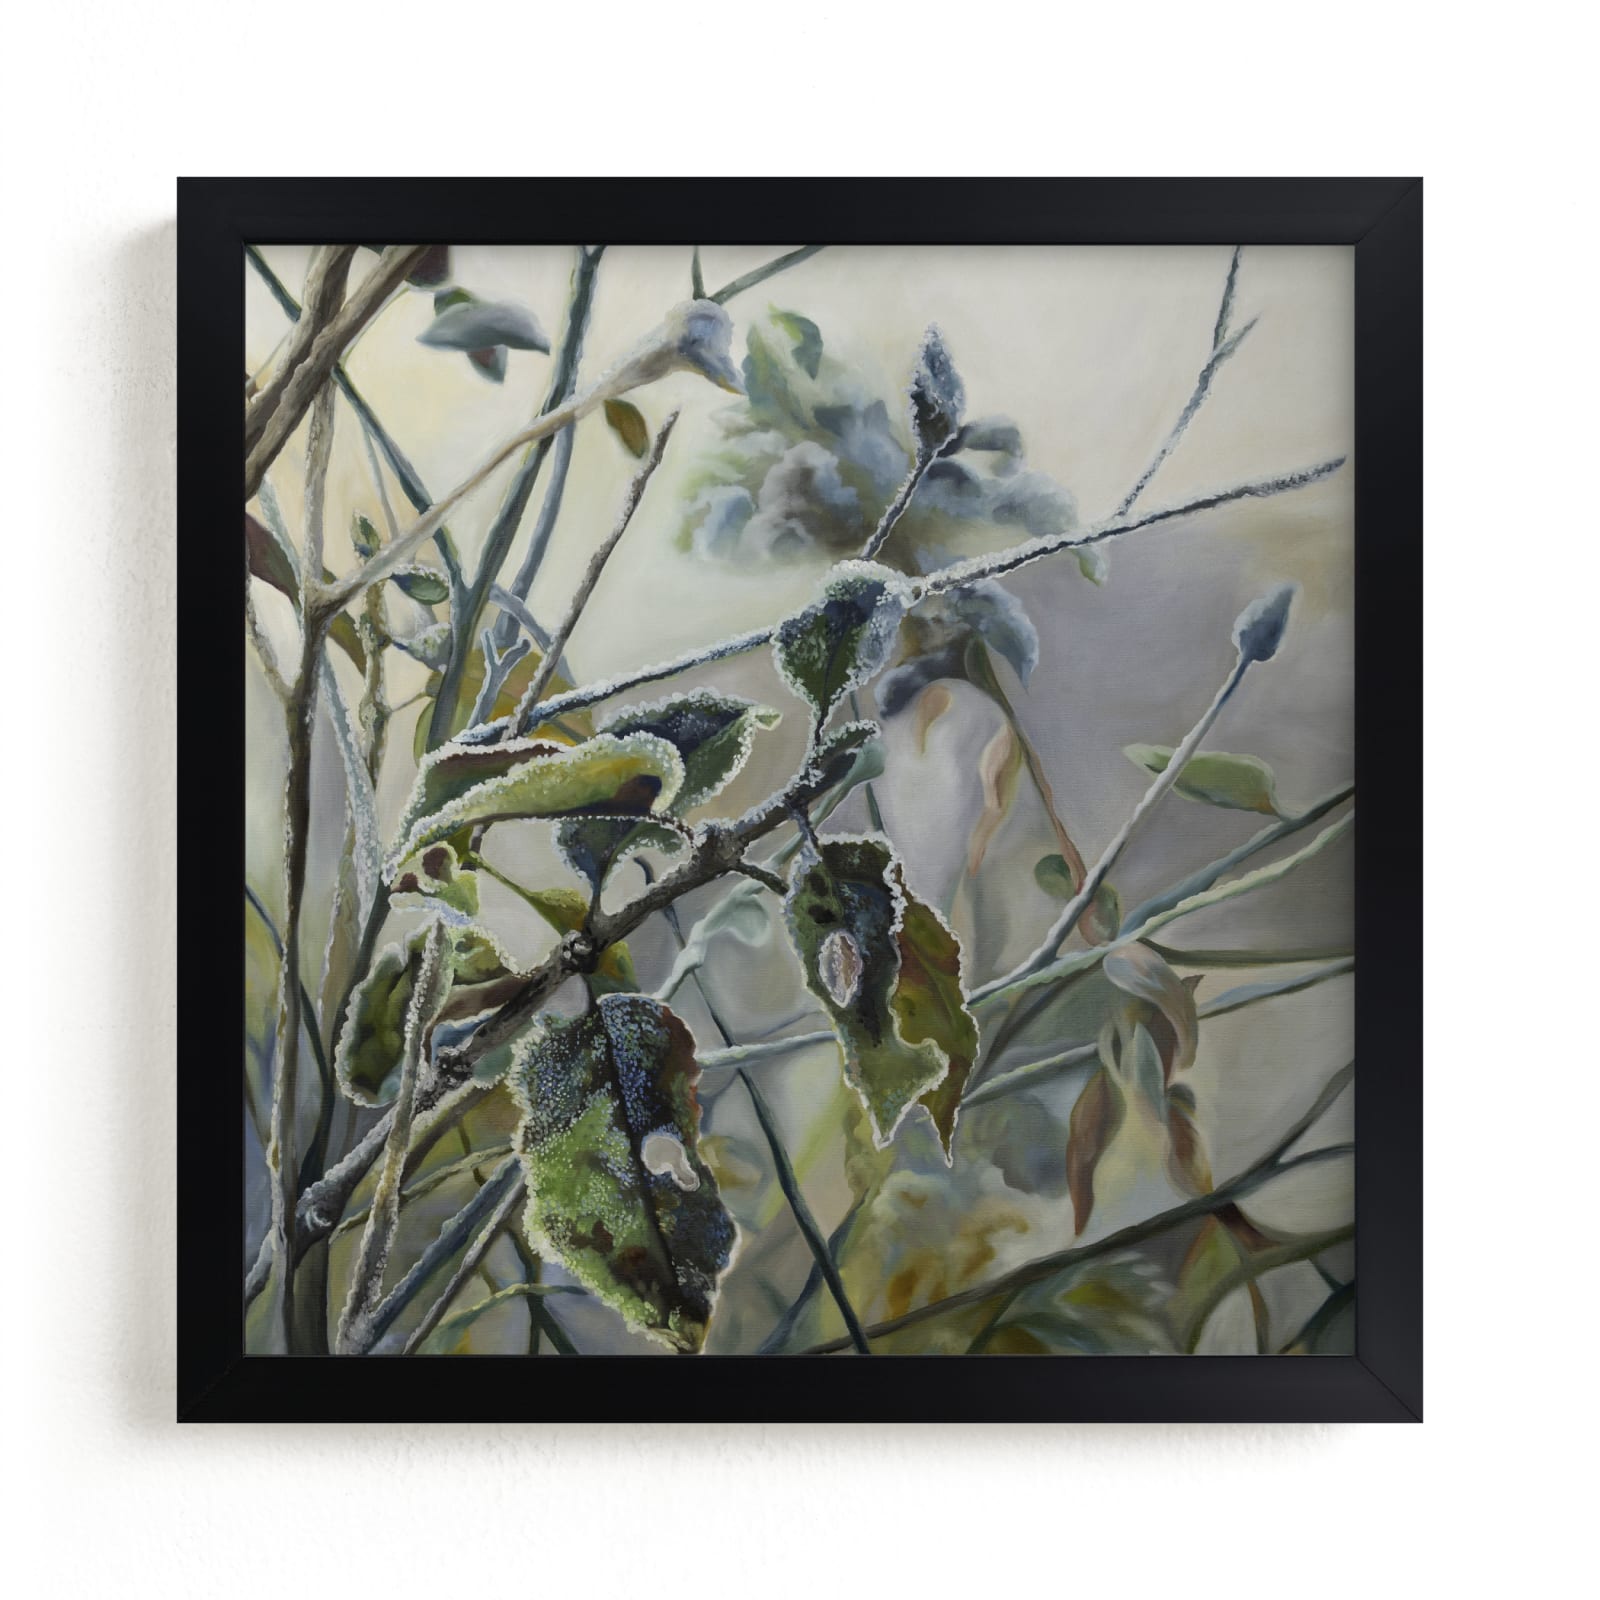 "Frosted by Fog 2" by Mandy Trimble Leonard in beautiful frame options and a variety of sizes.